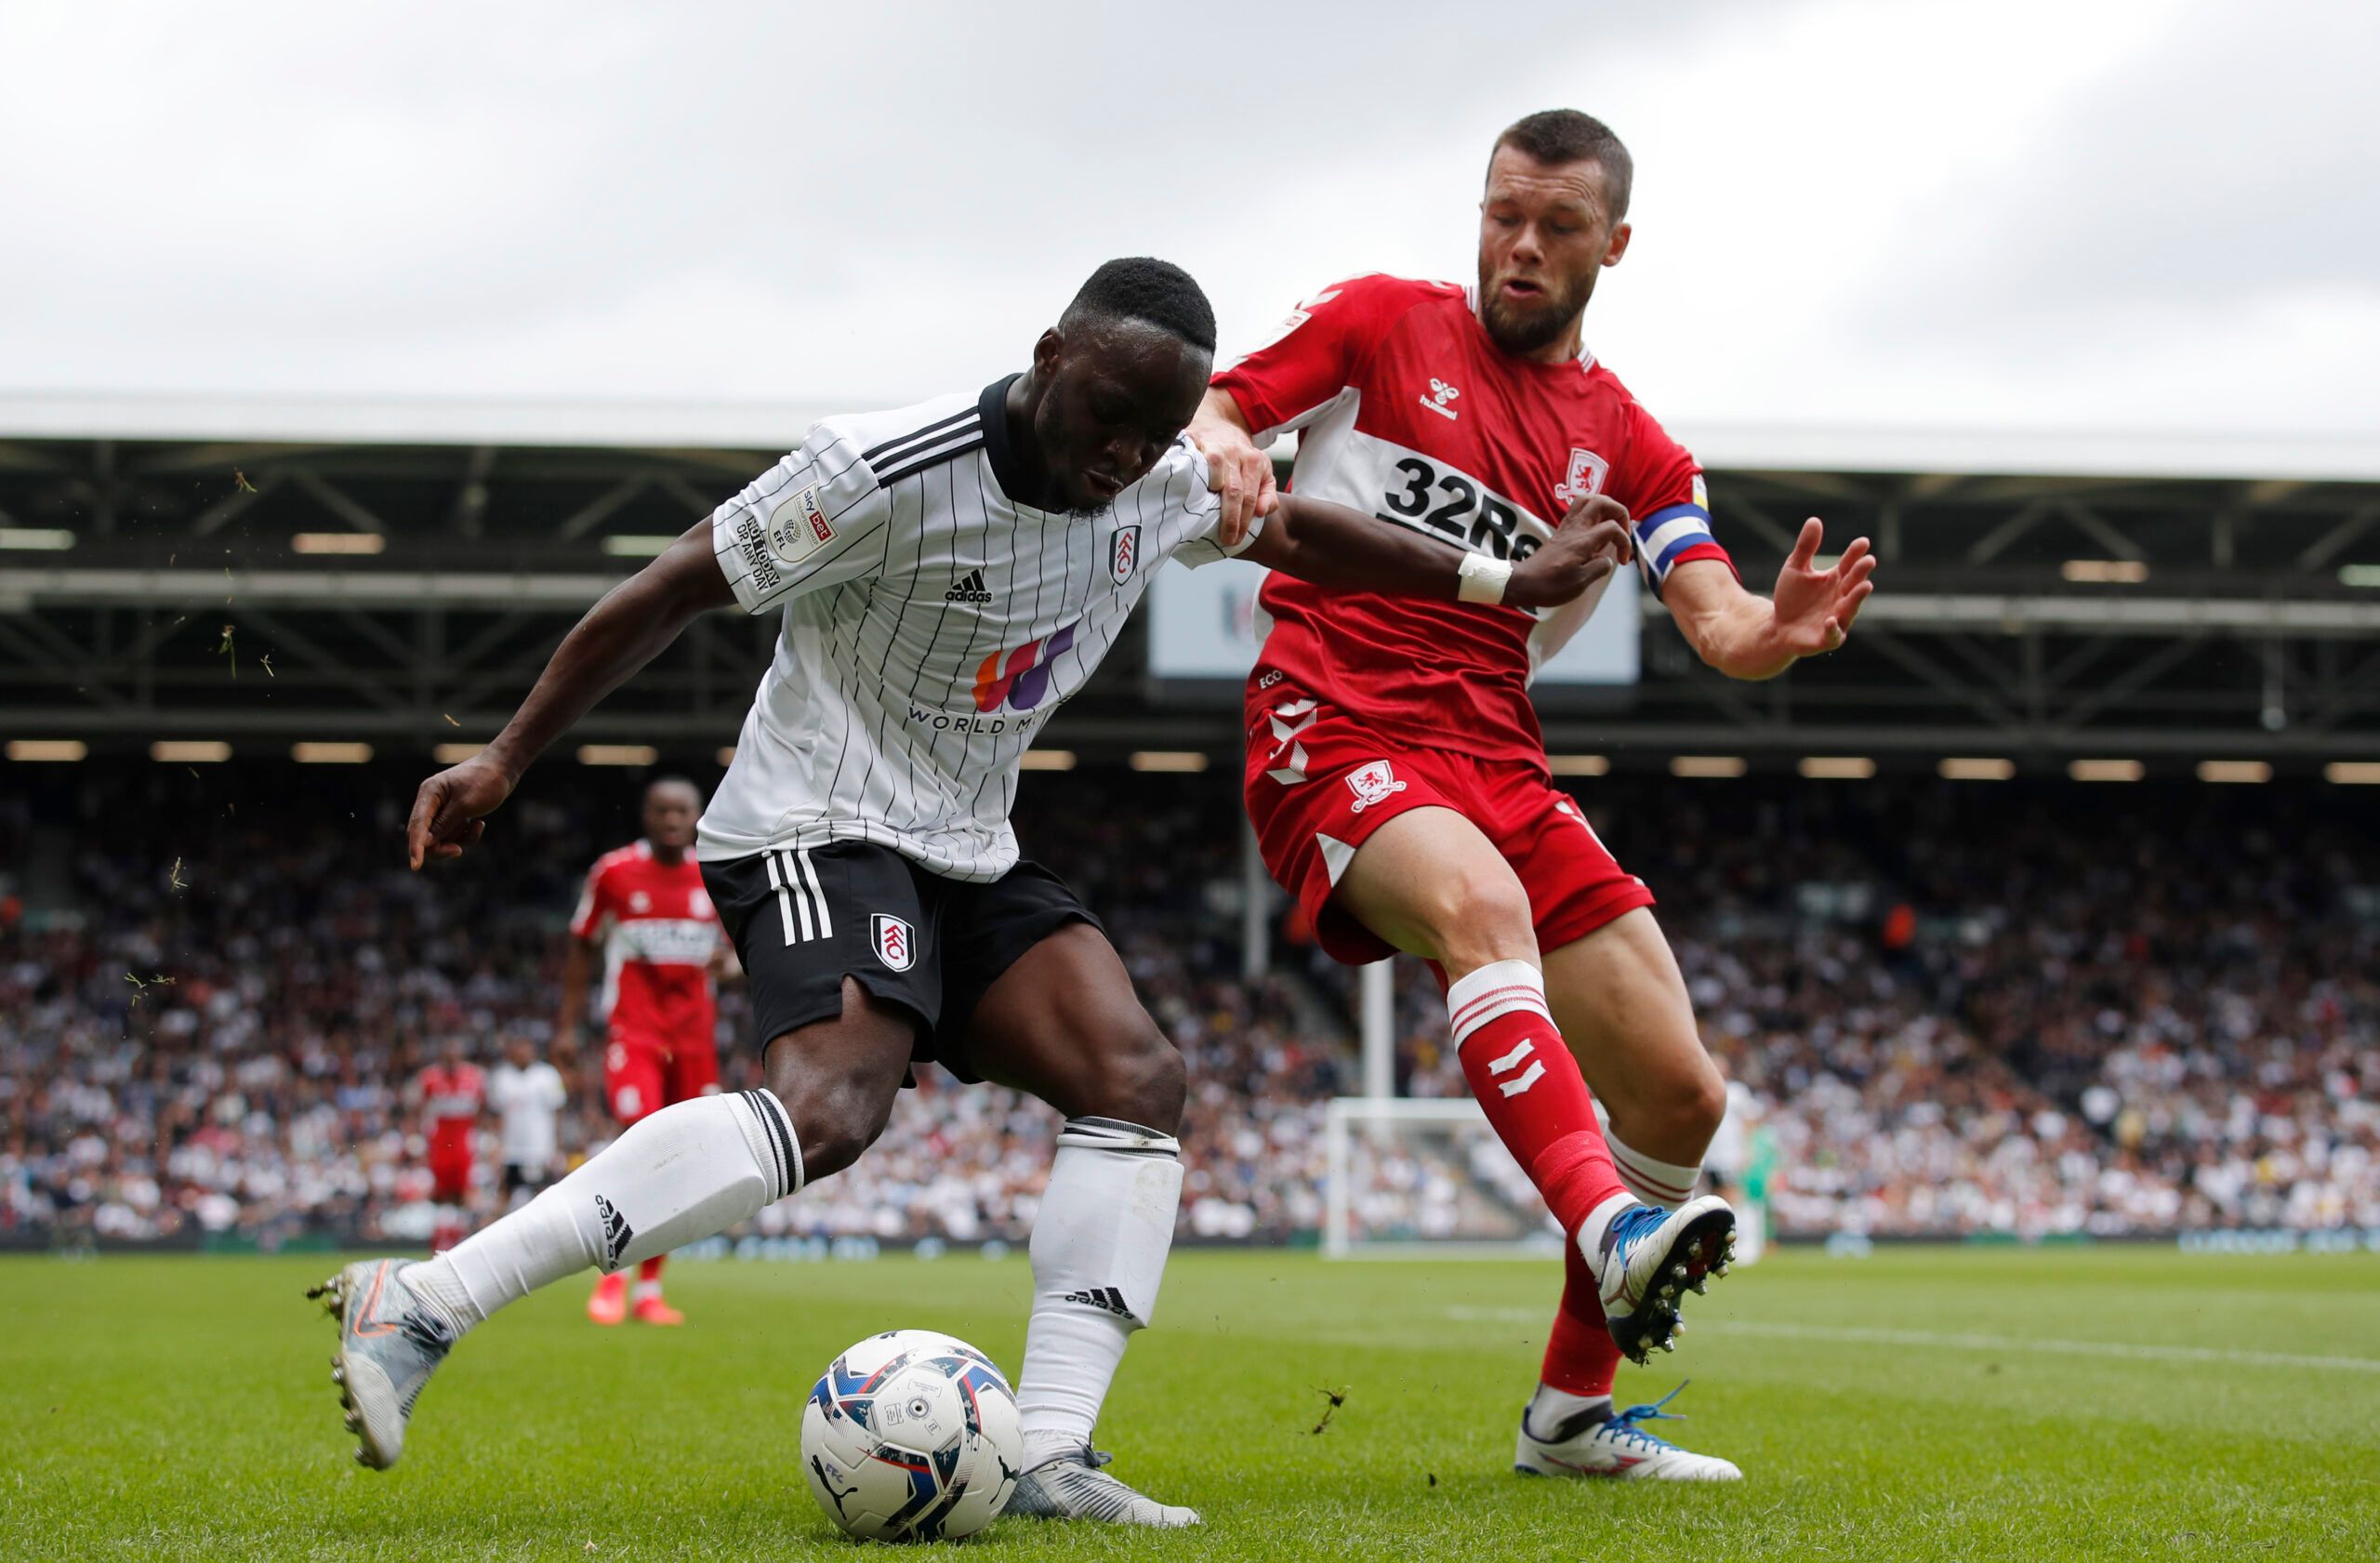 Soccer Football - Championship - Fulham v Middlesbrough - Craven Cottage, London, Britain - August 8, 2021 Fulham’s Neeskens Kebano in action with Middlesbrough's Jonny Howson Action Images/Andrew Couldridge